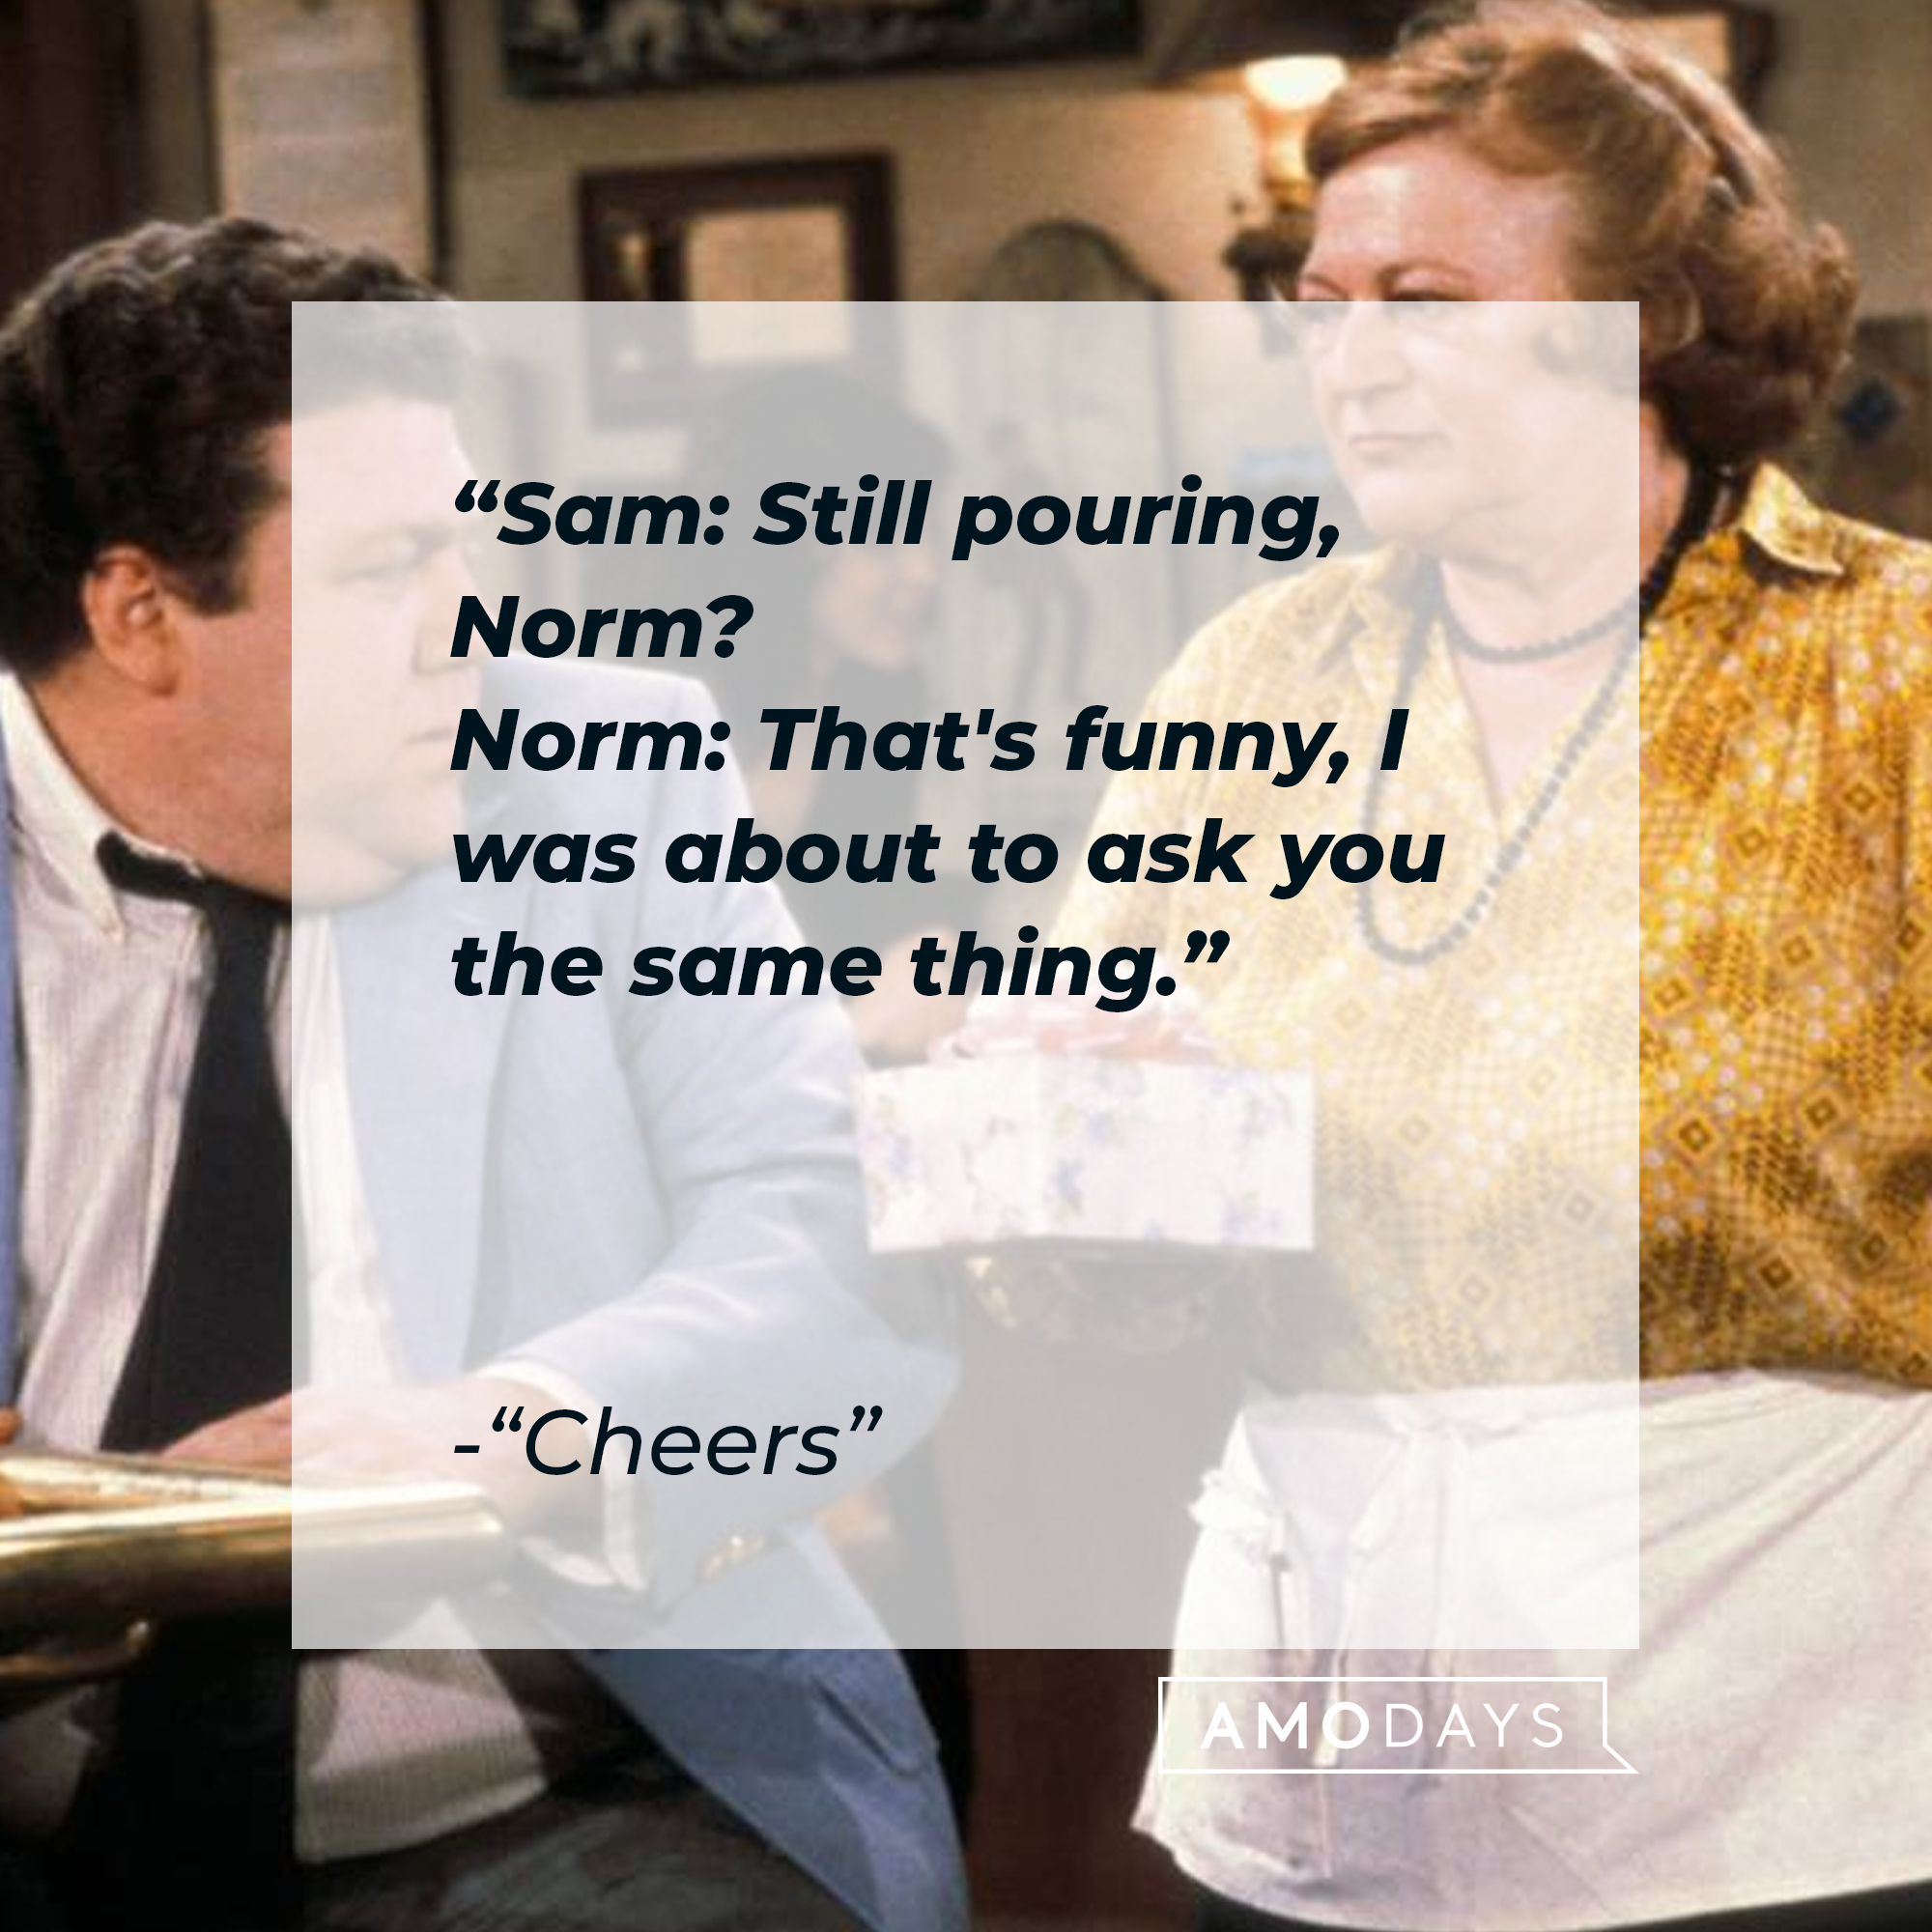 Norm Peterson with his quote: "Sam: Still pouring, Norm? ; Norm: That's funny, I was about to ask you the same thing." | Source: Facebook.com/Cheers